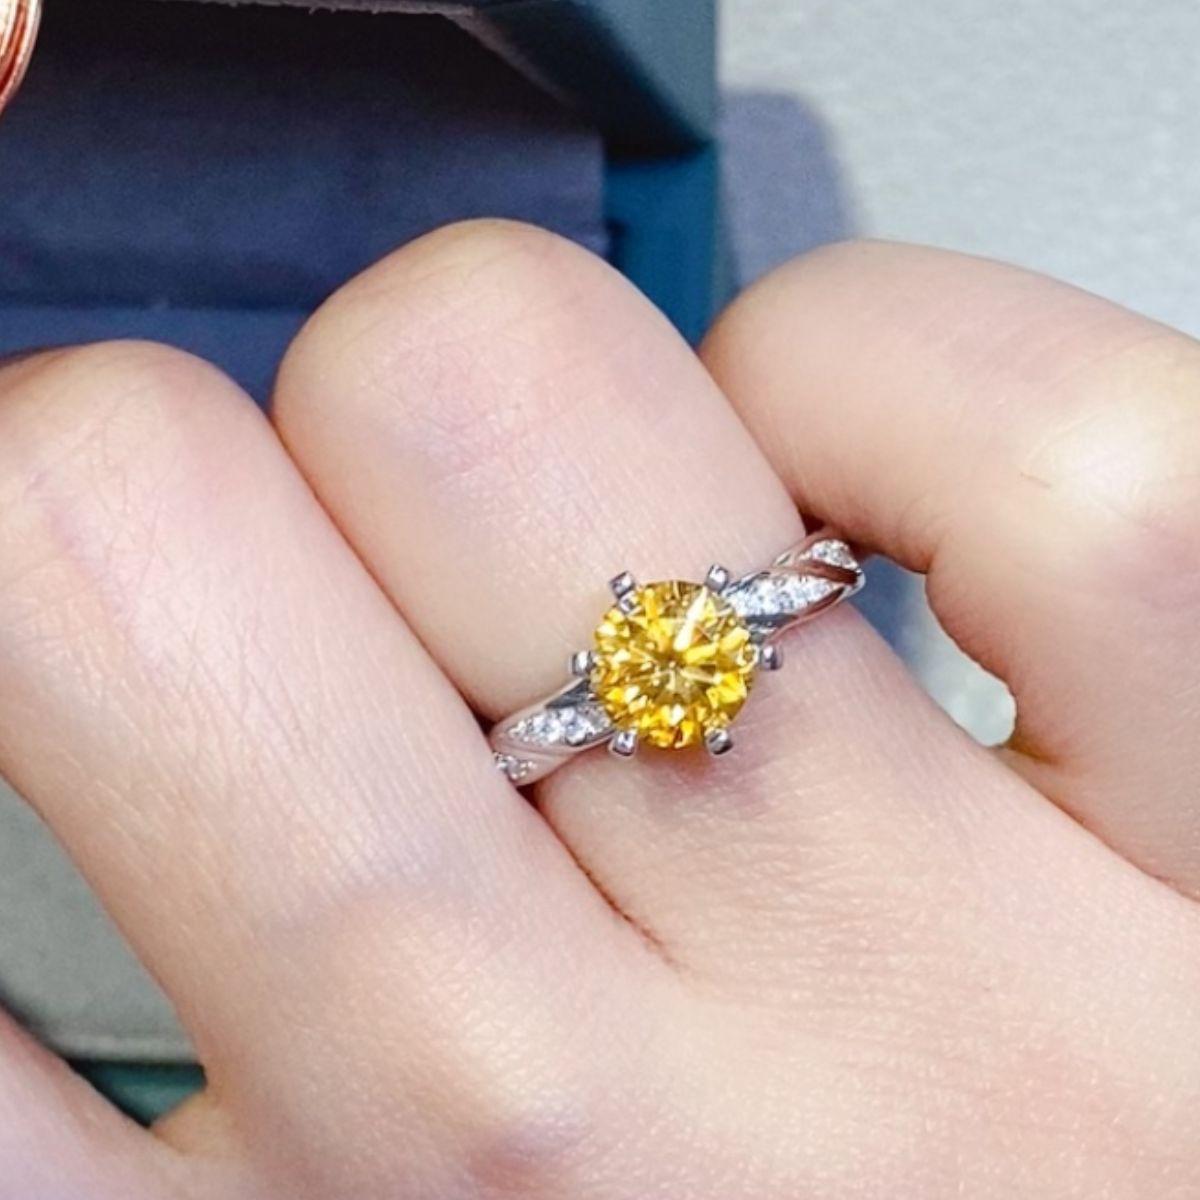 a woman's hand holding a yellow diamond ring